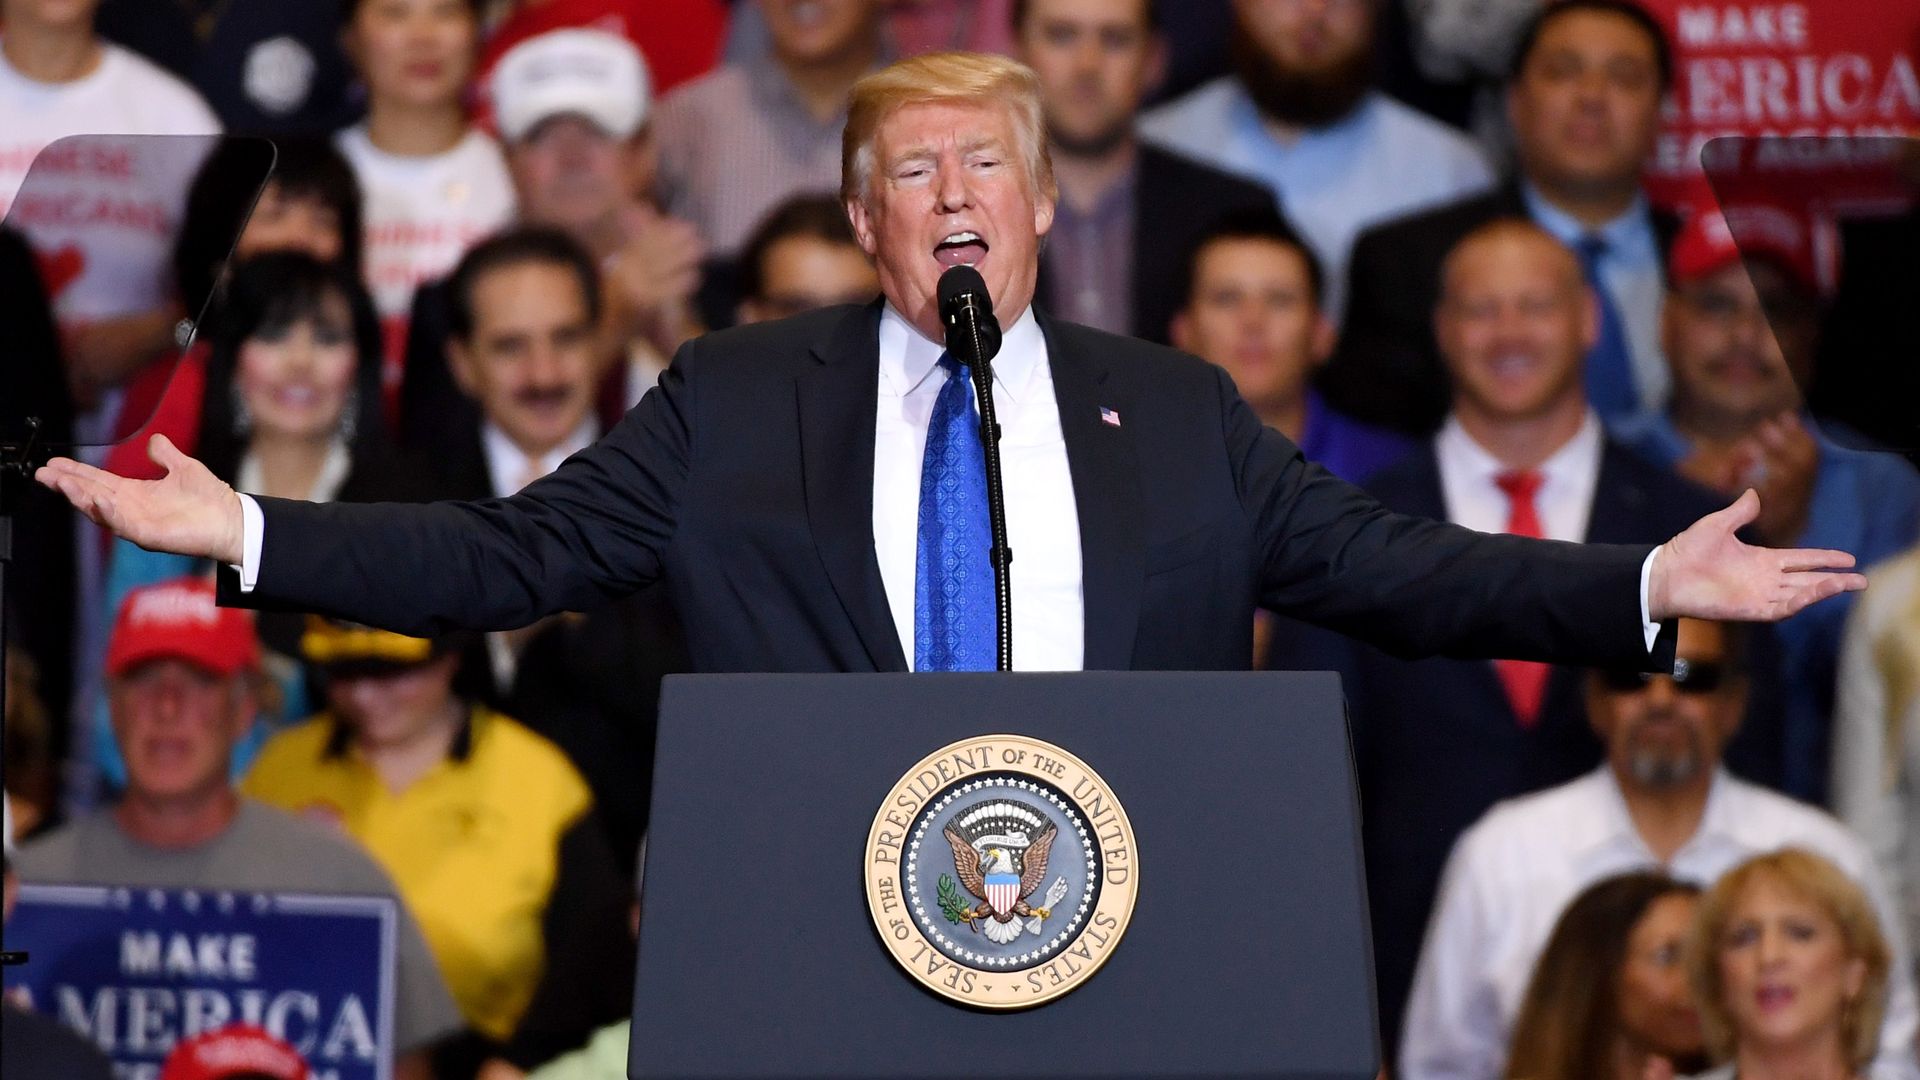 President Trump throws his hands in the air while speaking at a rally in Las Vegas